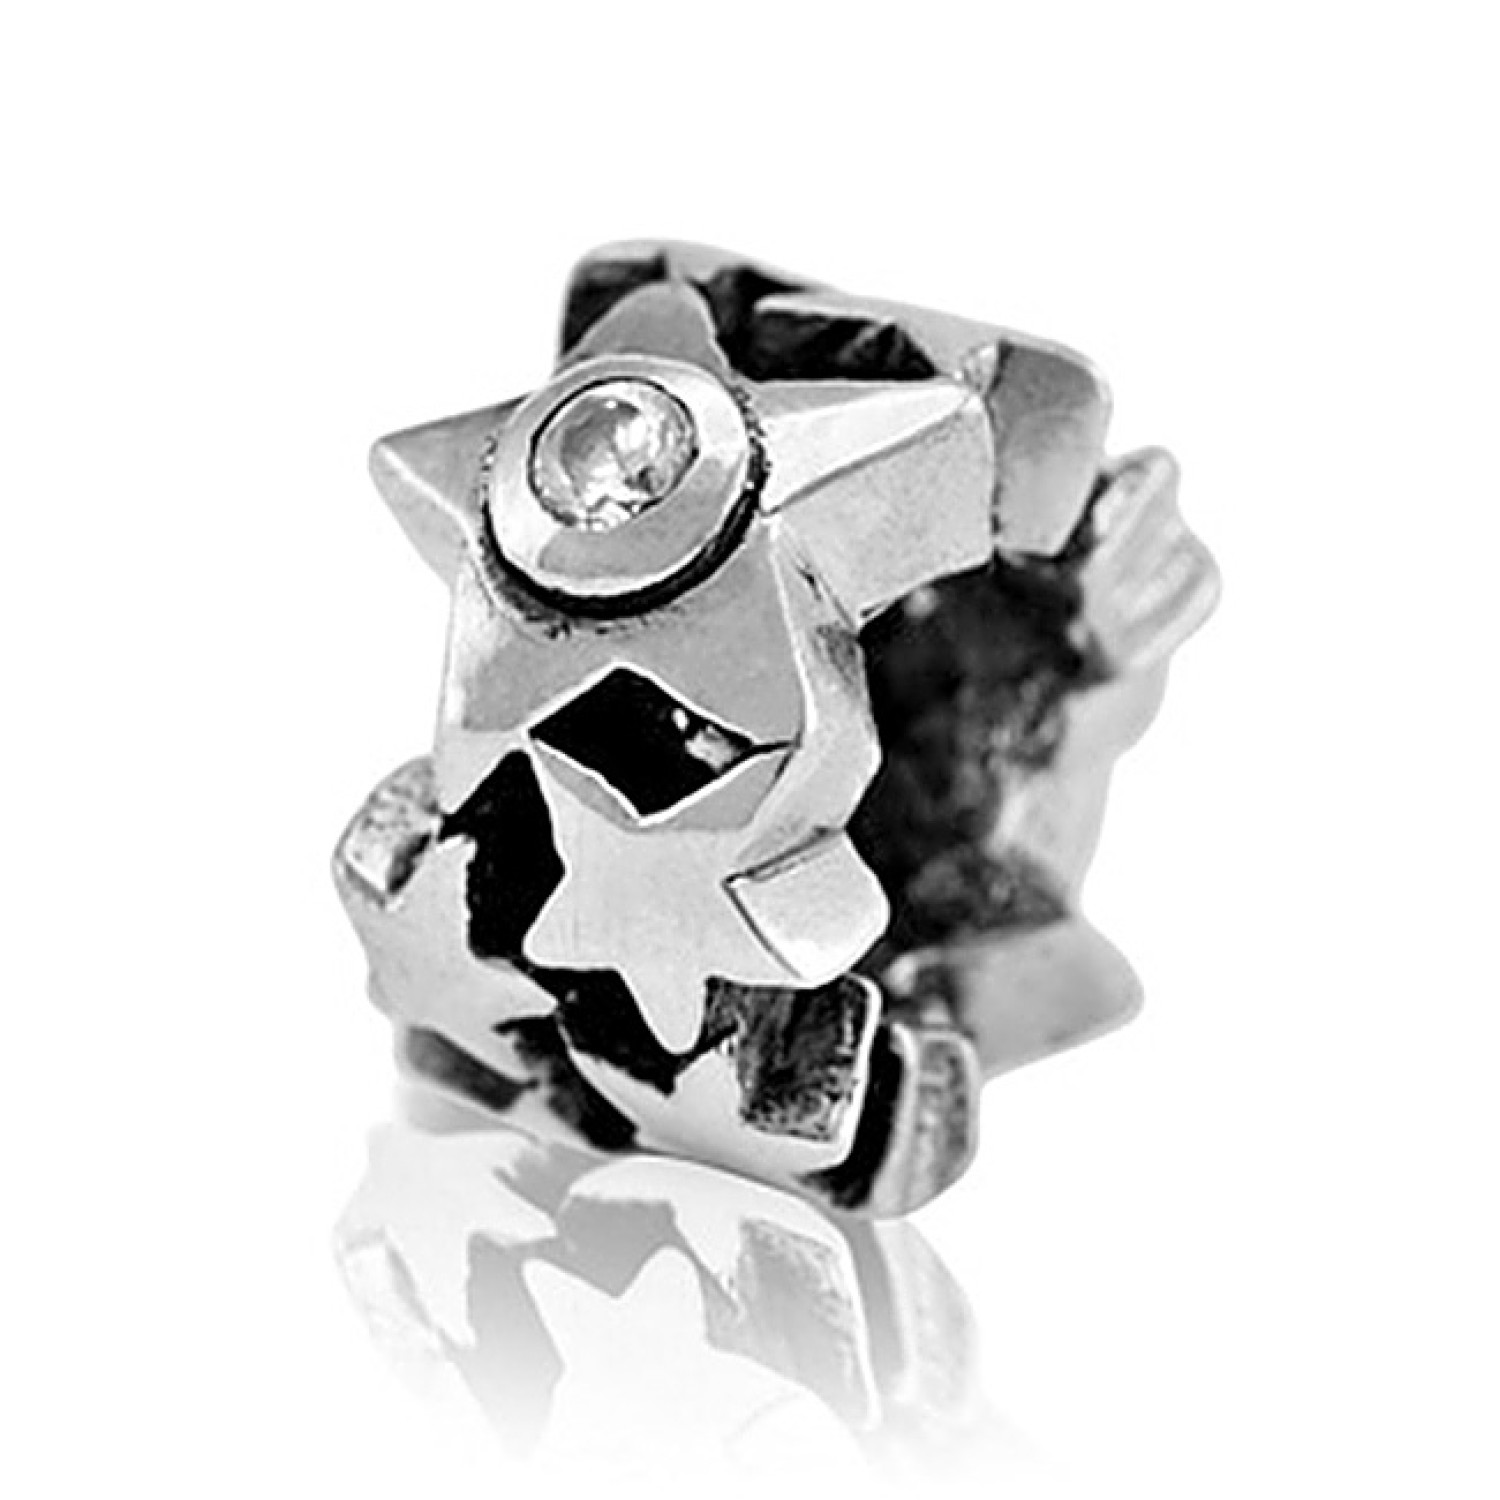 LK156CZ Evolve  Charm Shining Star. Stars have long represented our greatest aspirations, helping us to navigate through life. The stars guided the original Maori migration in tribal waka (canoes) across the Pacific to New Zealand. A sparkling cubic zirco